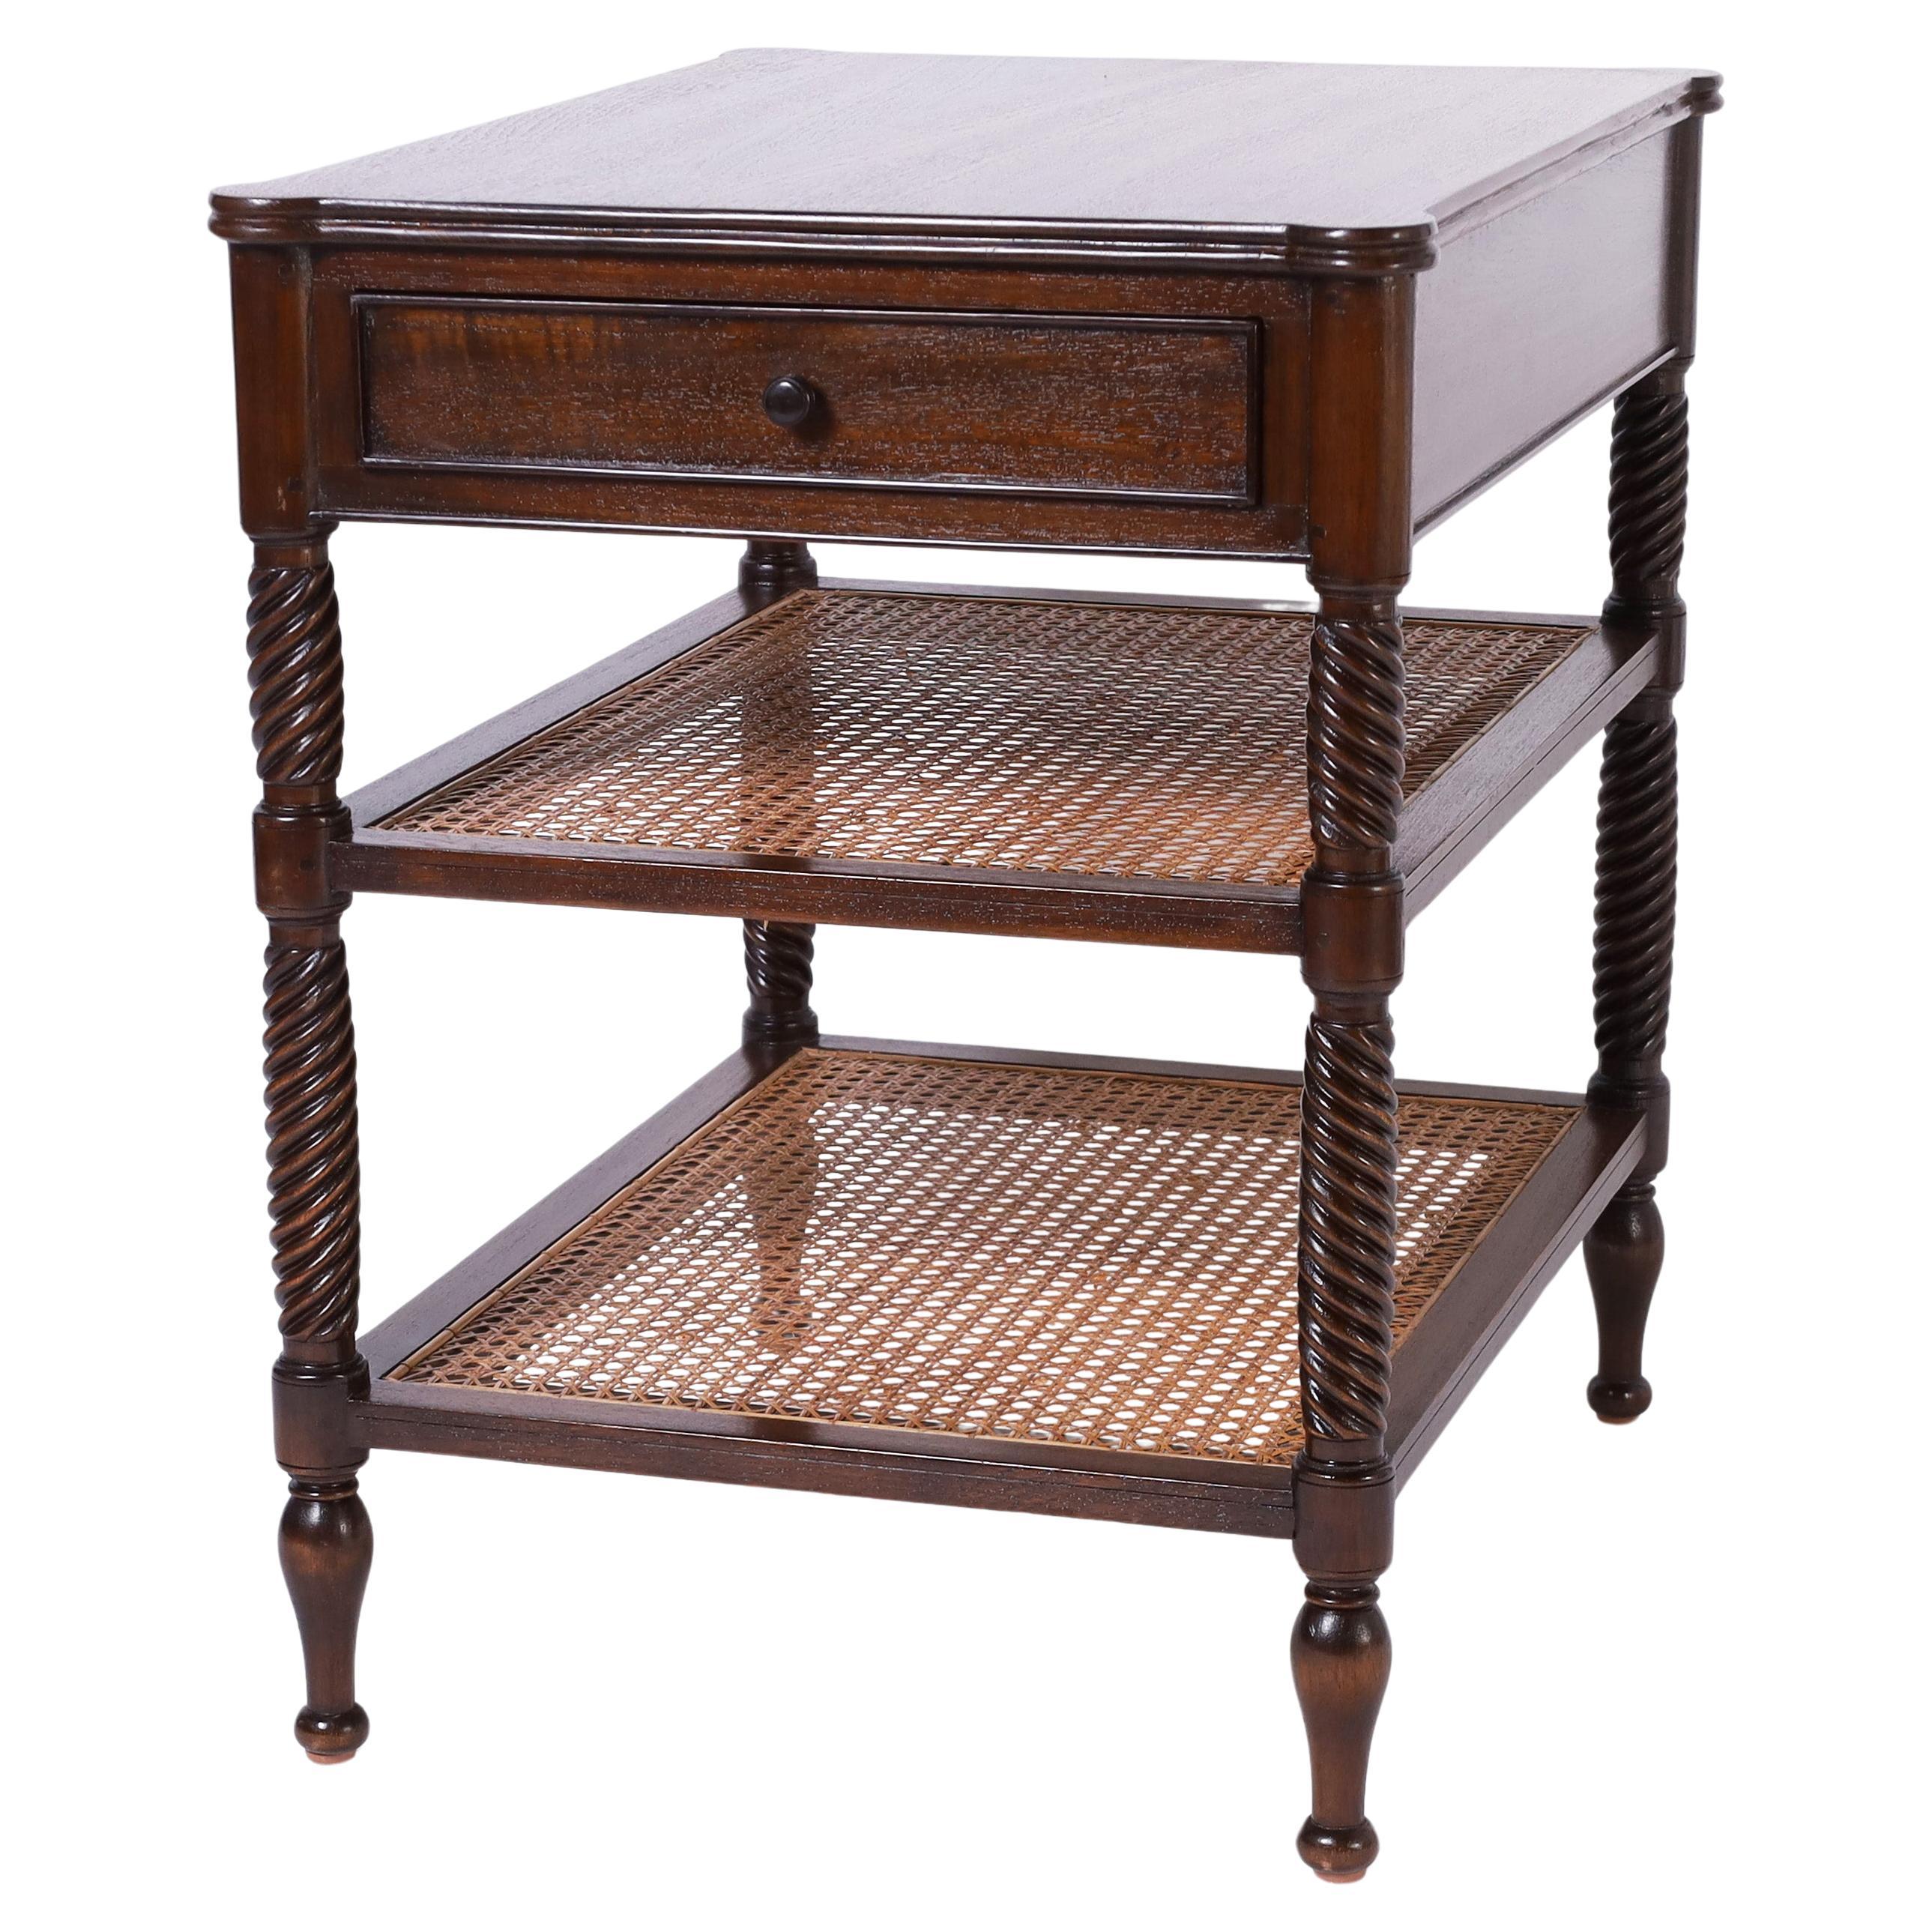 British Colonial Style Three Tiered Caned Stand or Table For Sale